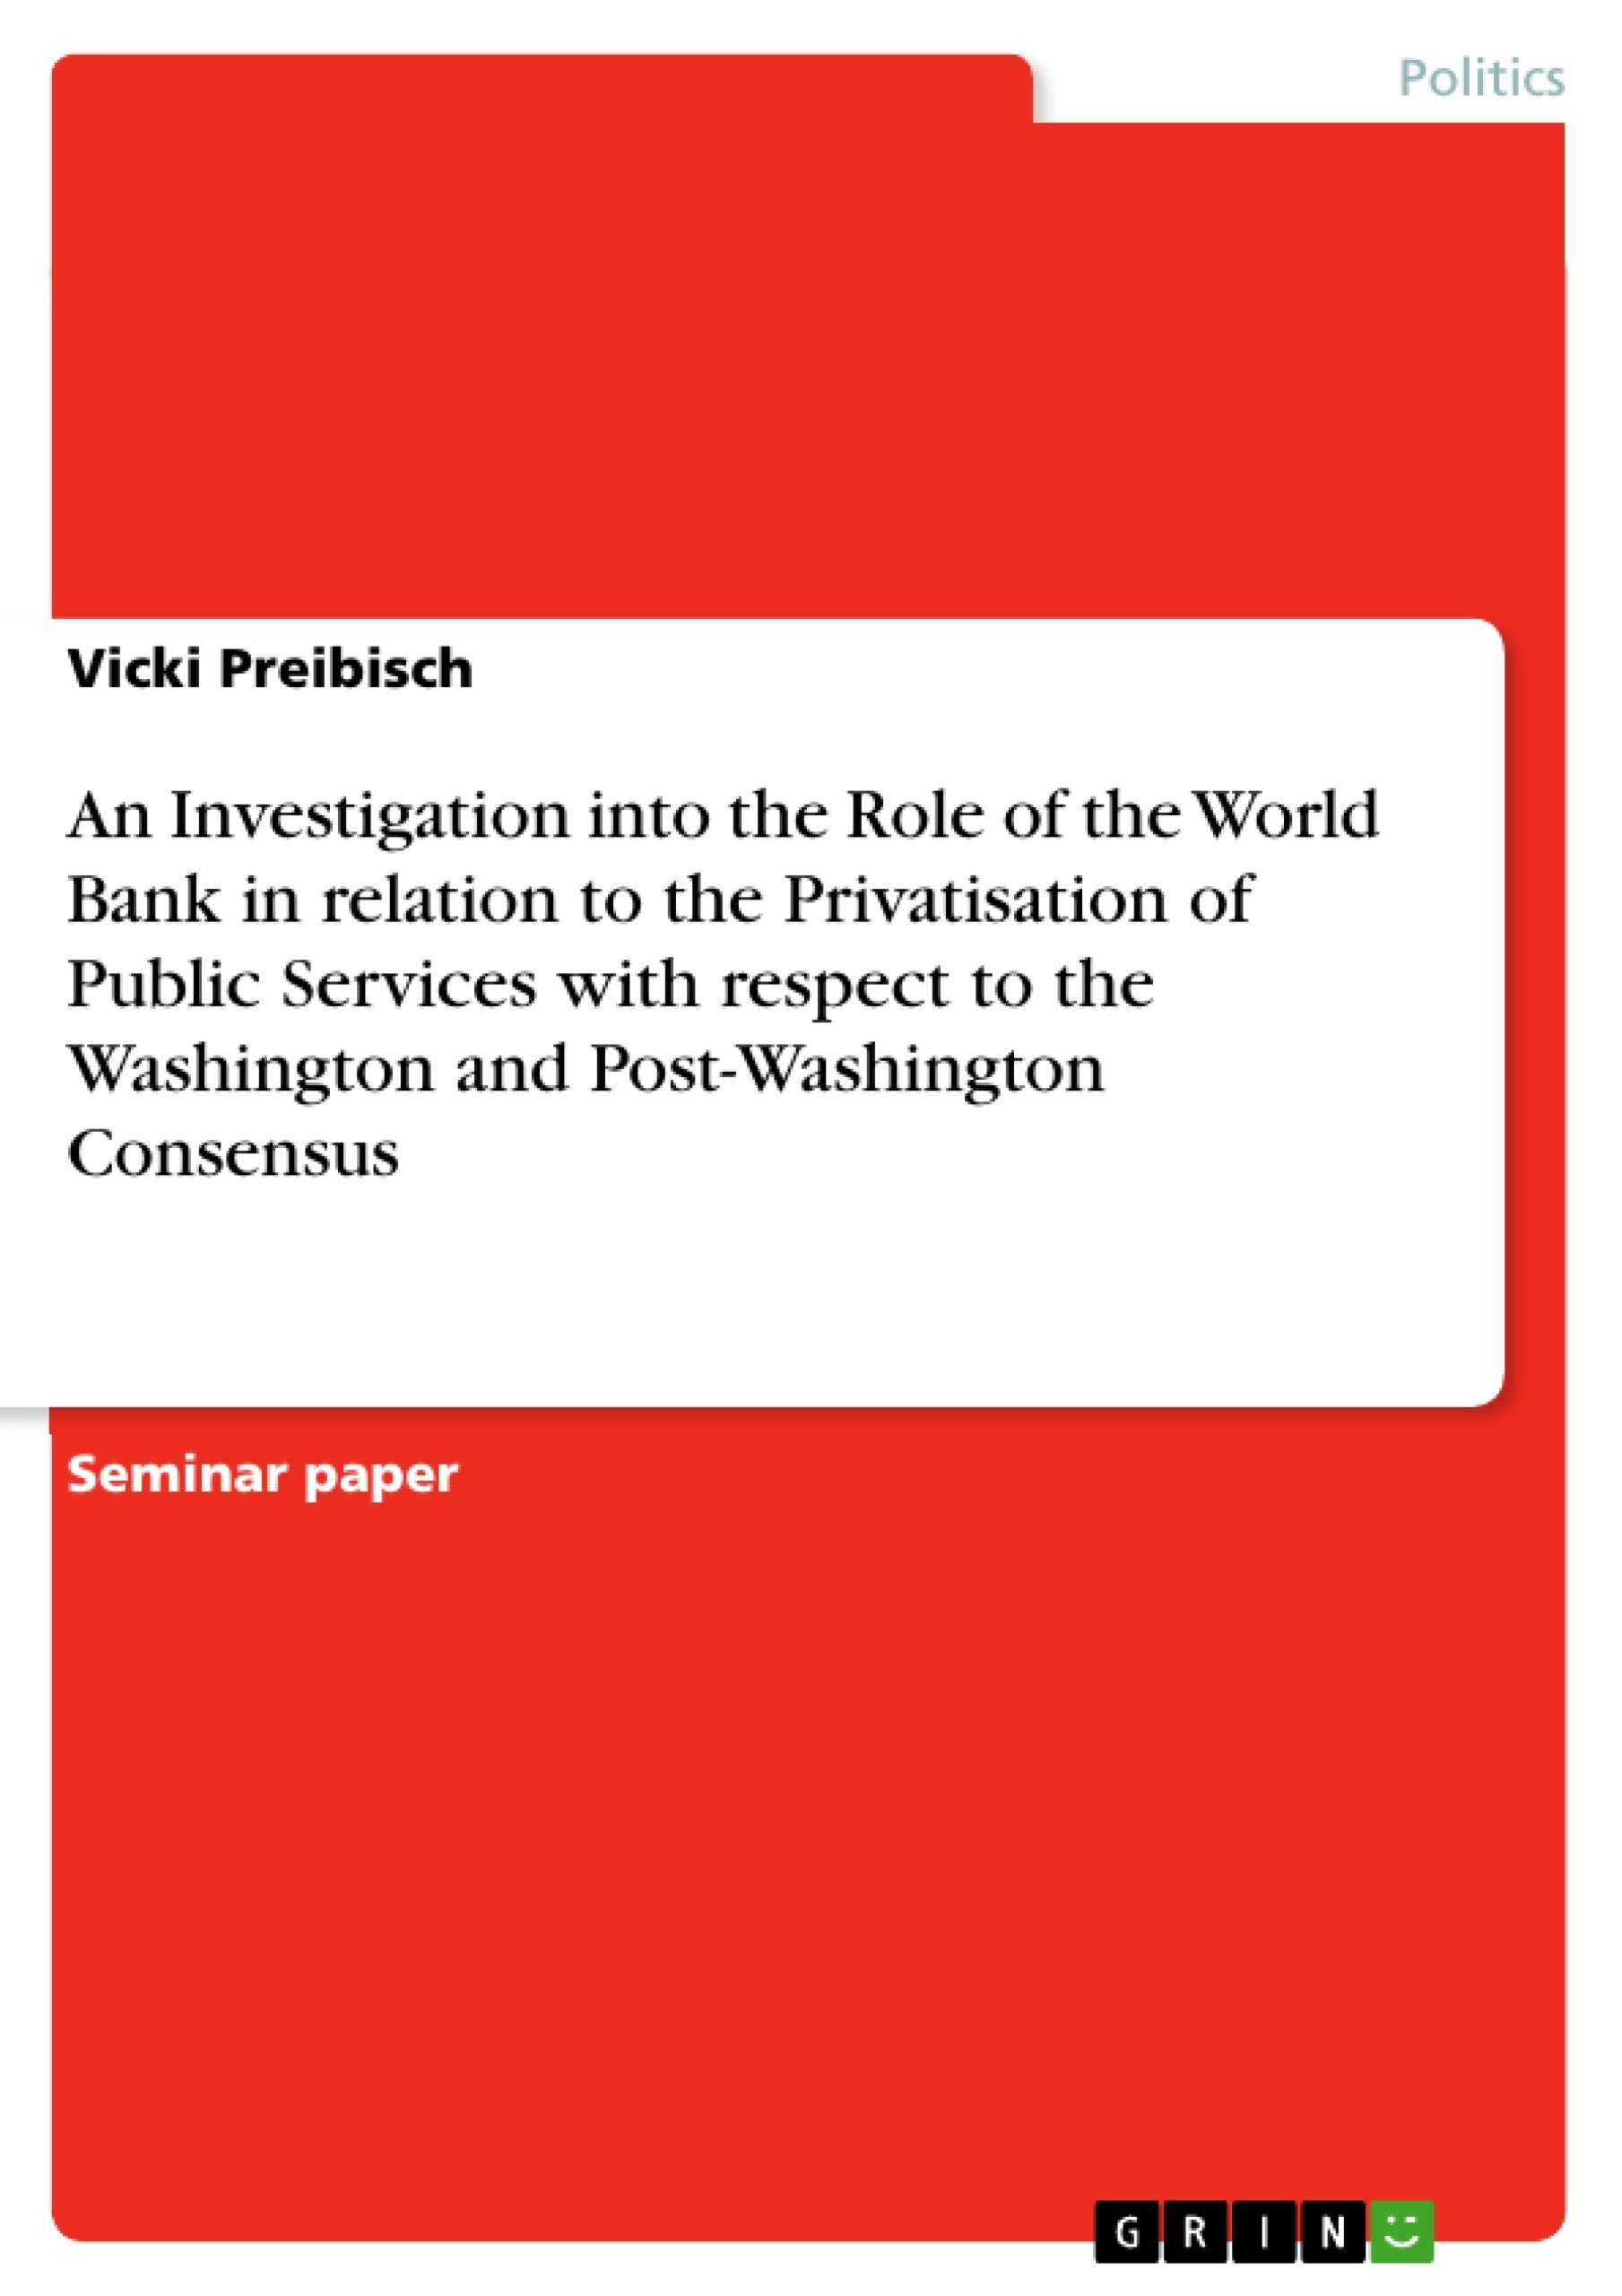 Titre: An Investigation into the Role of the World Bank in relation to the Privatisation of Public Services with respect to the Washington and Post-Washington Consensus